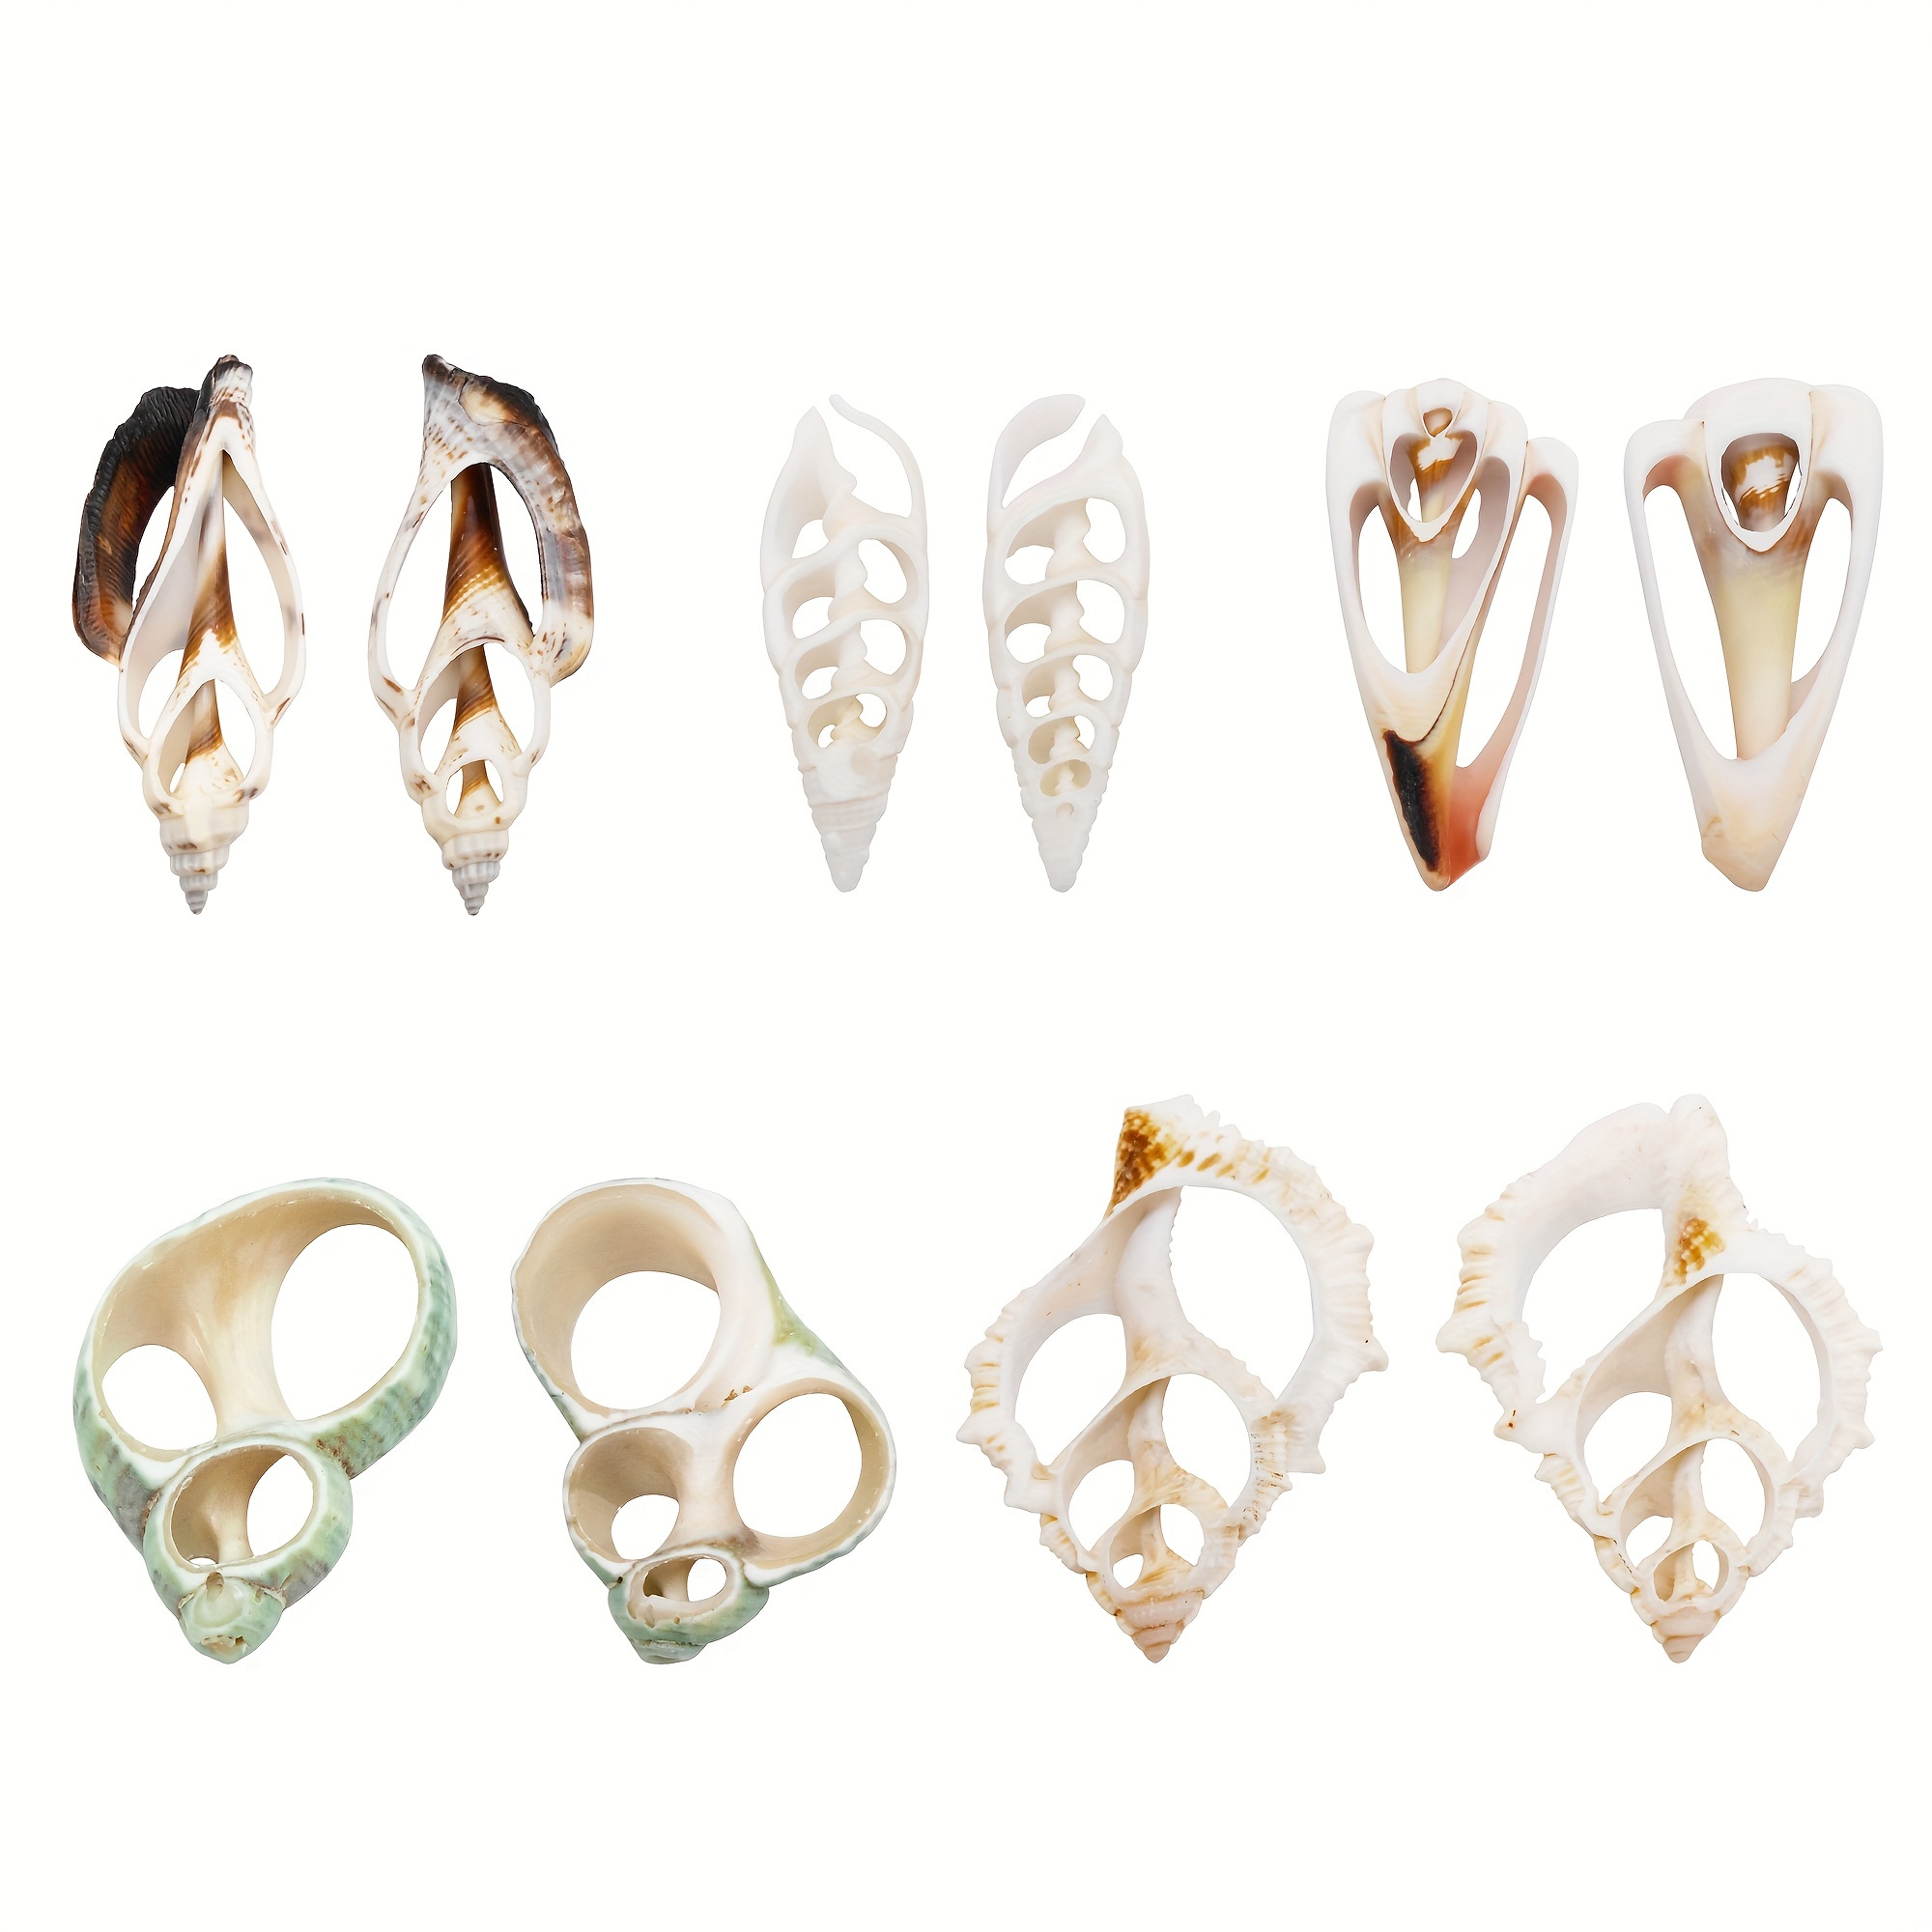 

10pcs Conch Shells Slice Charms Beads For Ocean Beach Mermaid Crown Resin Jewelry Making Party Home Decorations Wedding Decor Diy Crafts Fish Tank Vase Filler